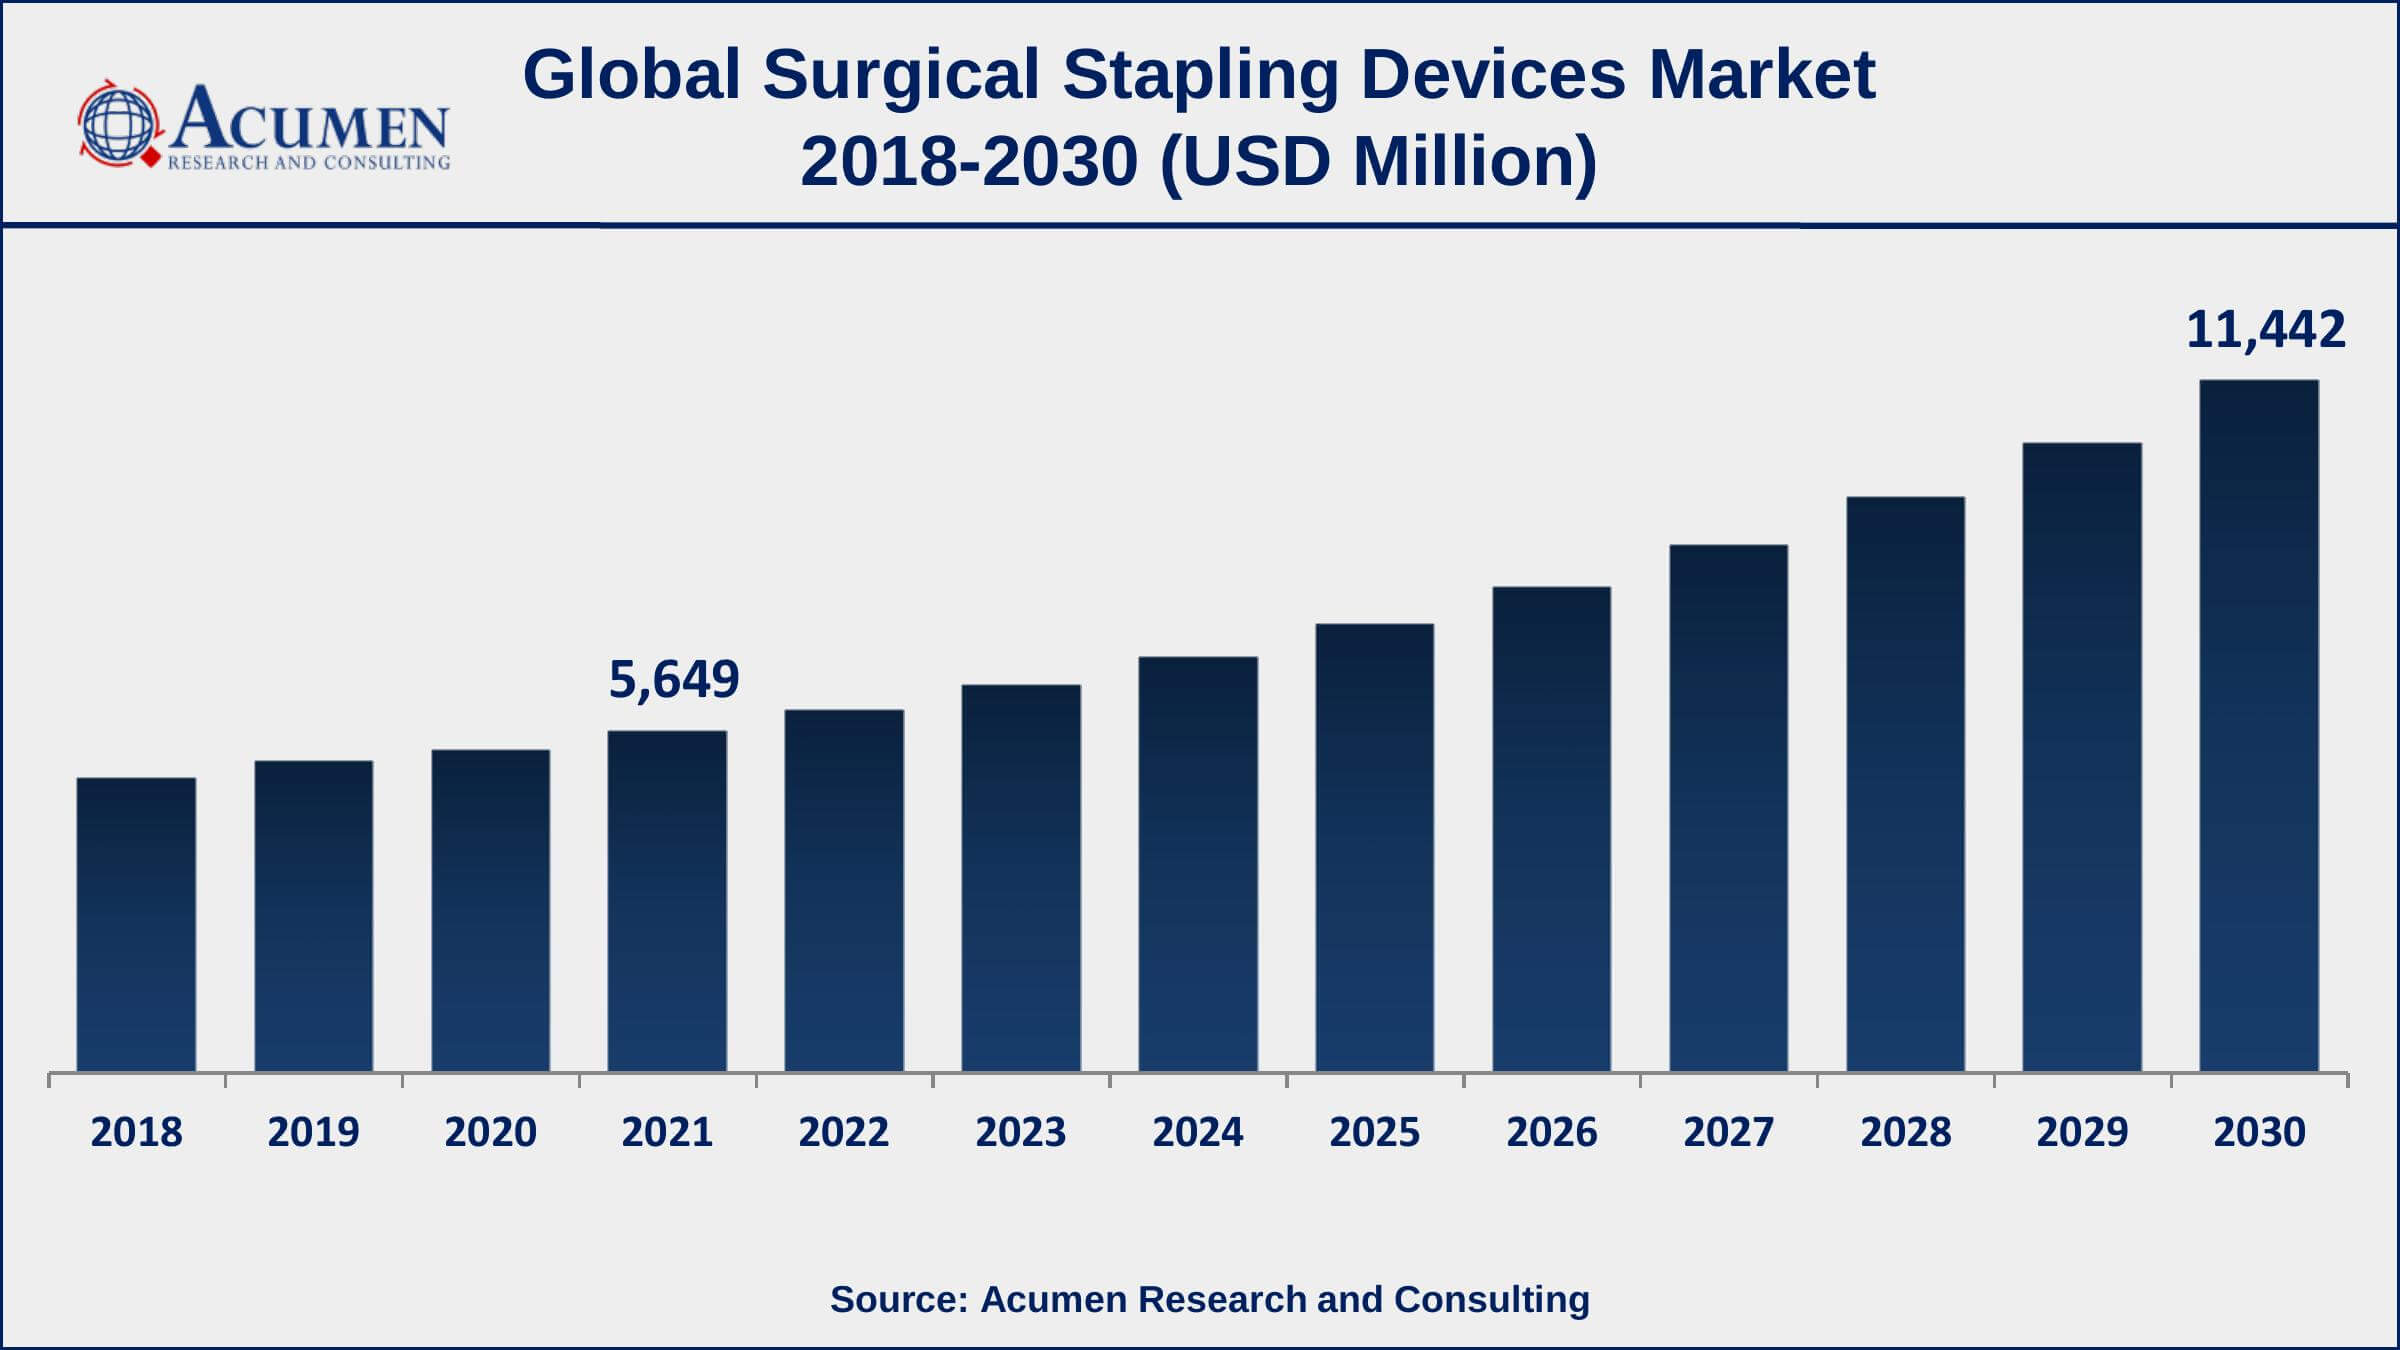 Asia-Pacific surgical stapling devices market growth will observe strongest CAGR from 2022 to 2030